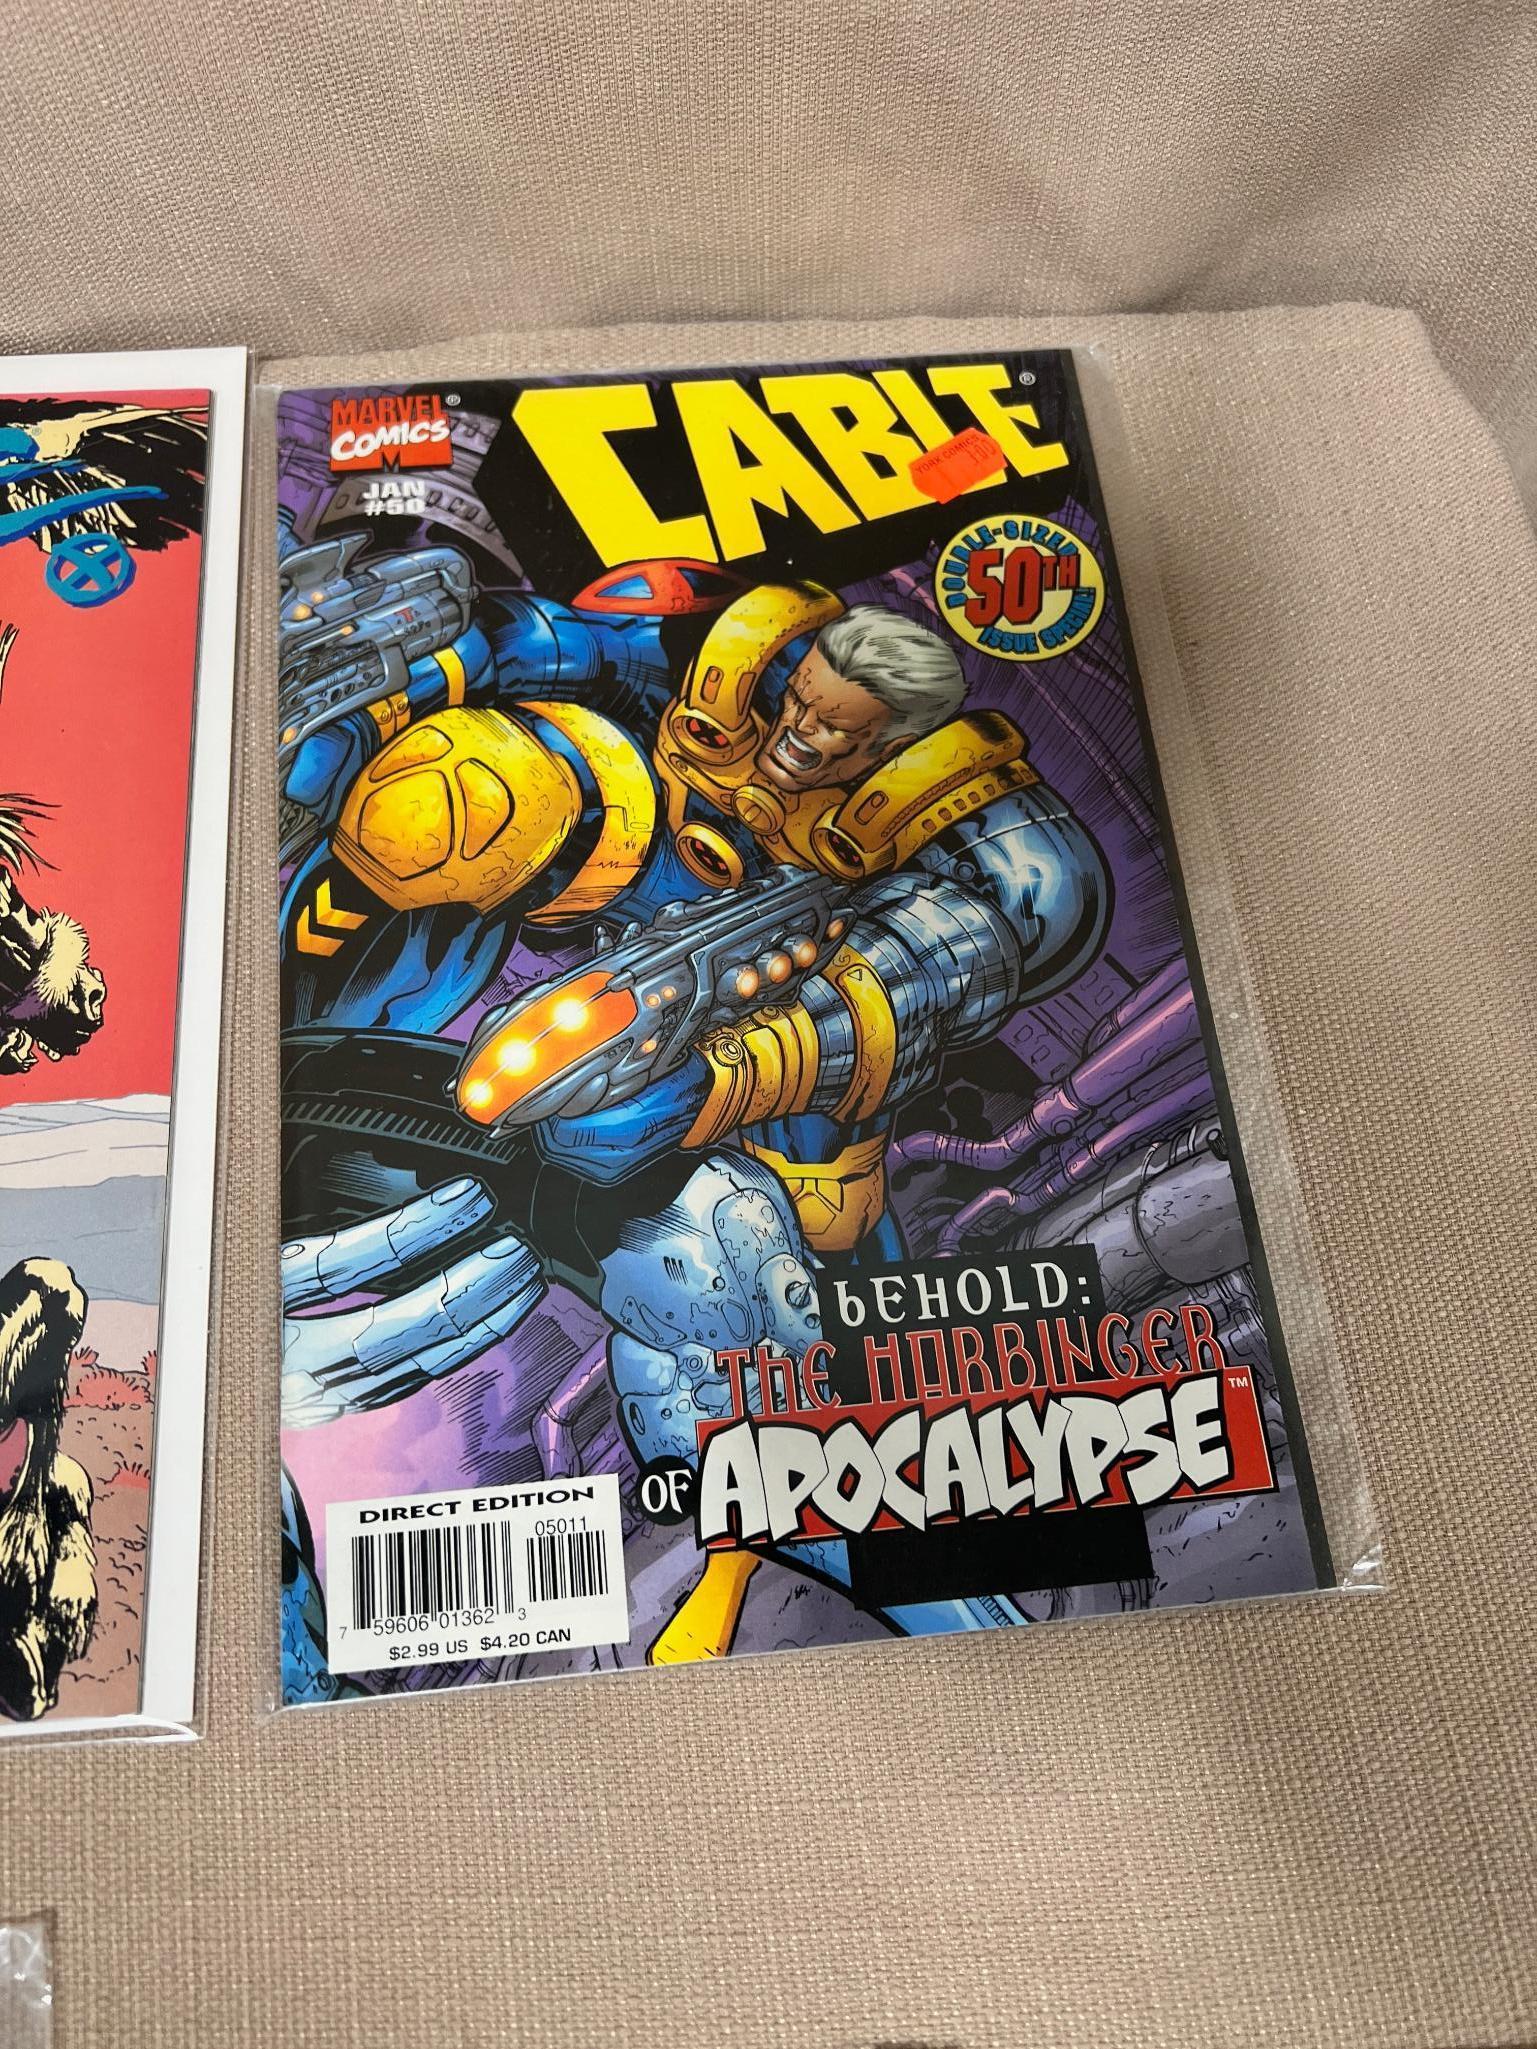 17- Cable Comic Books including some early issues